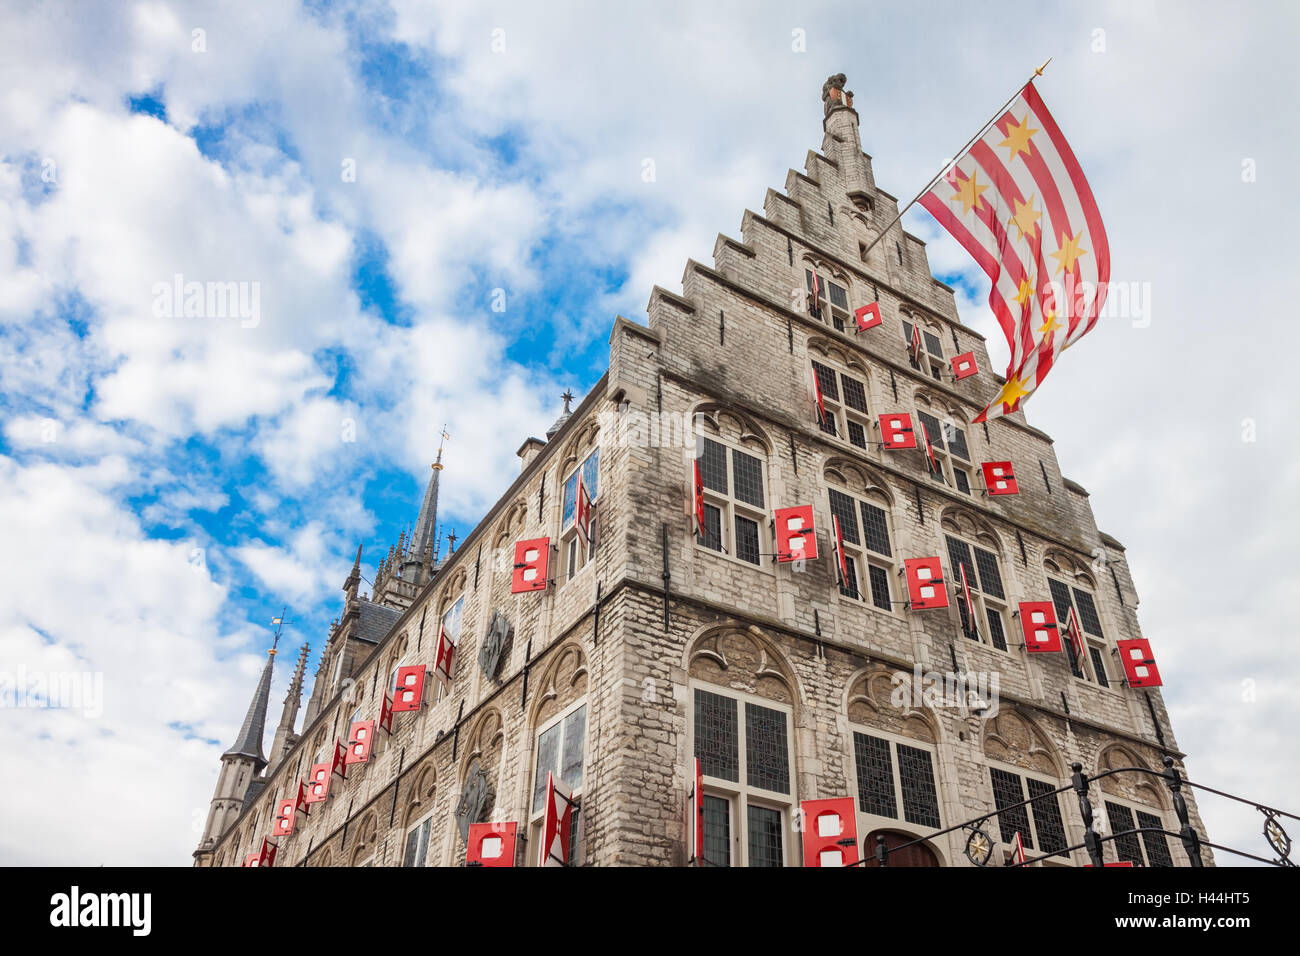 GOUDA, NETHERLANDS - May 18, 2012: Gothic building of the old Town Hall in Gouda, Netherlands Stock Photo